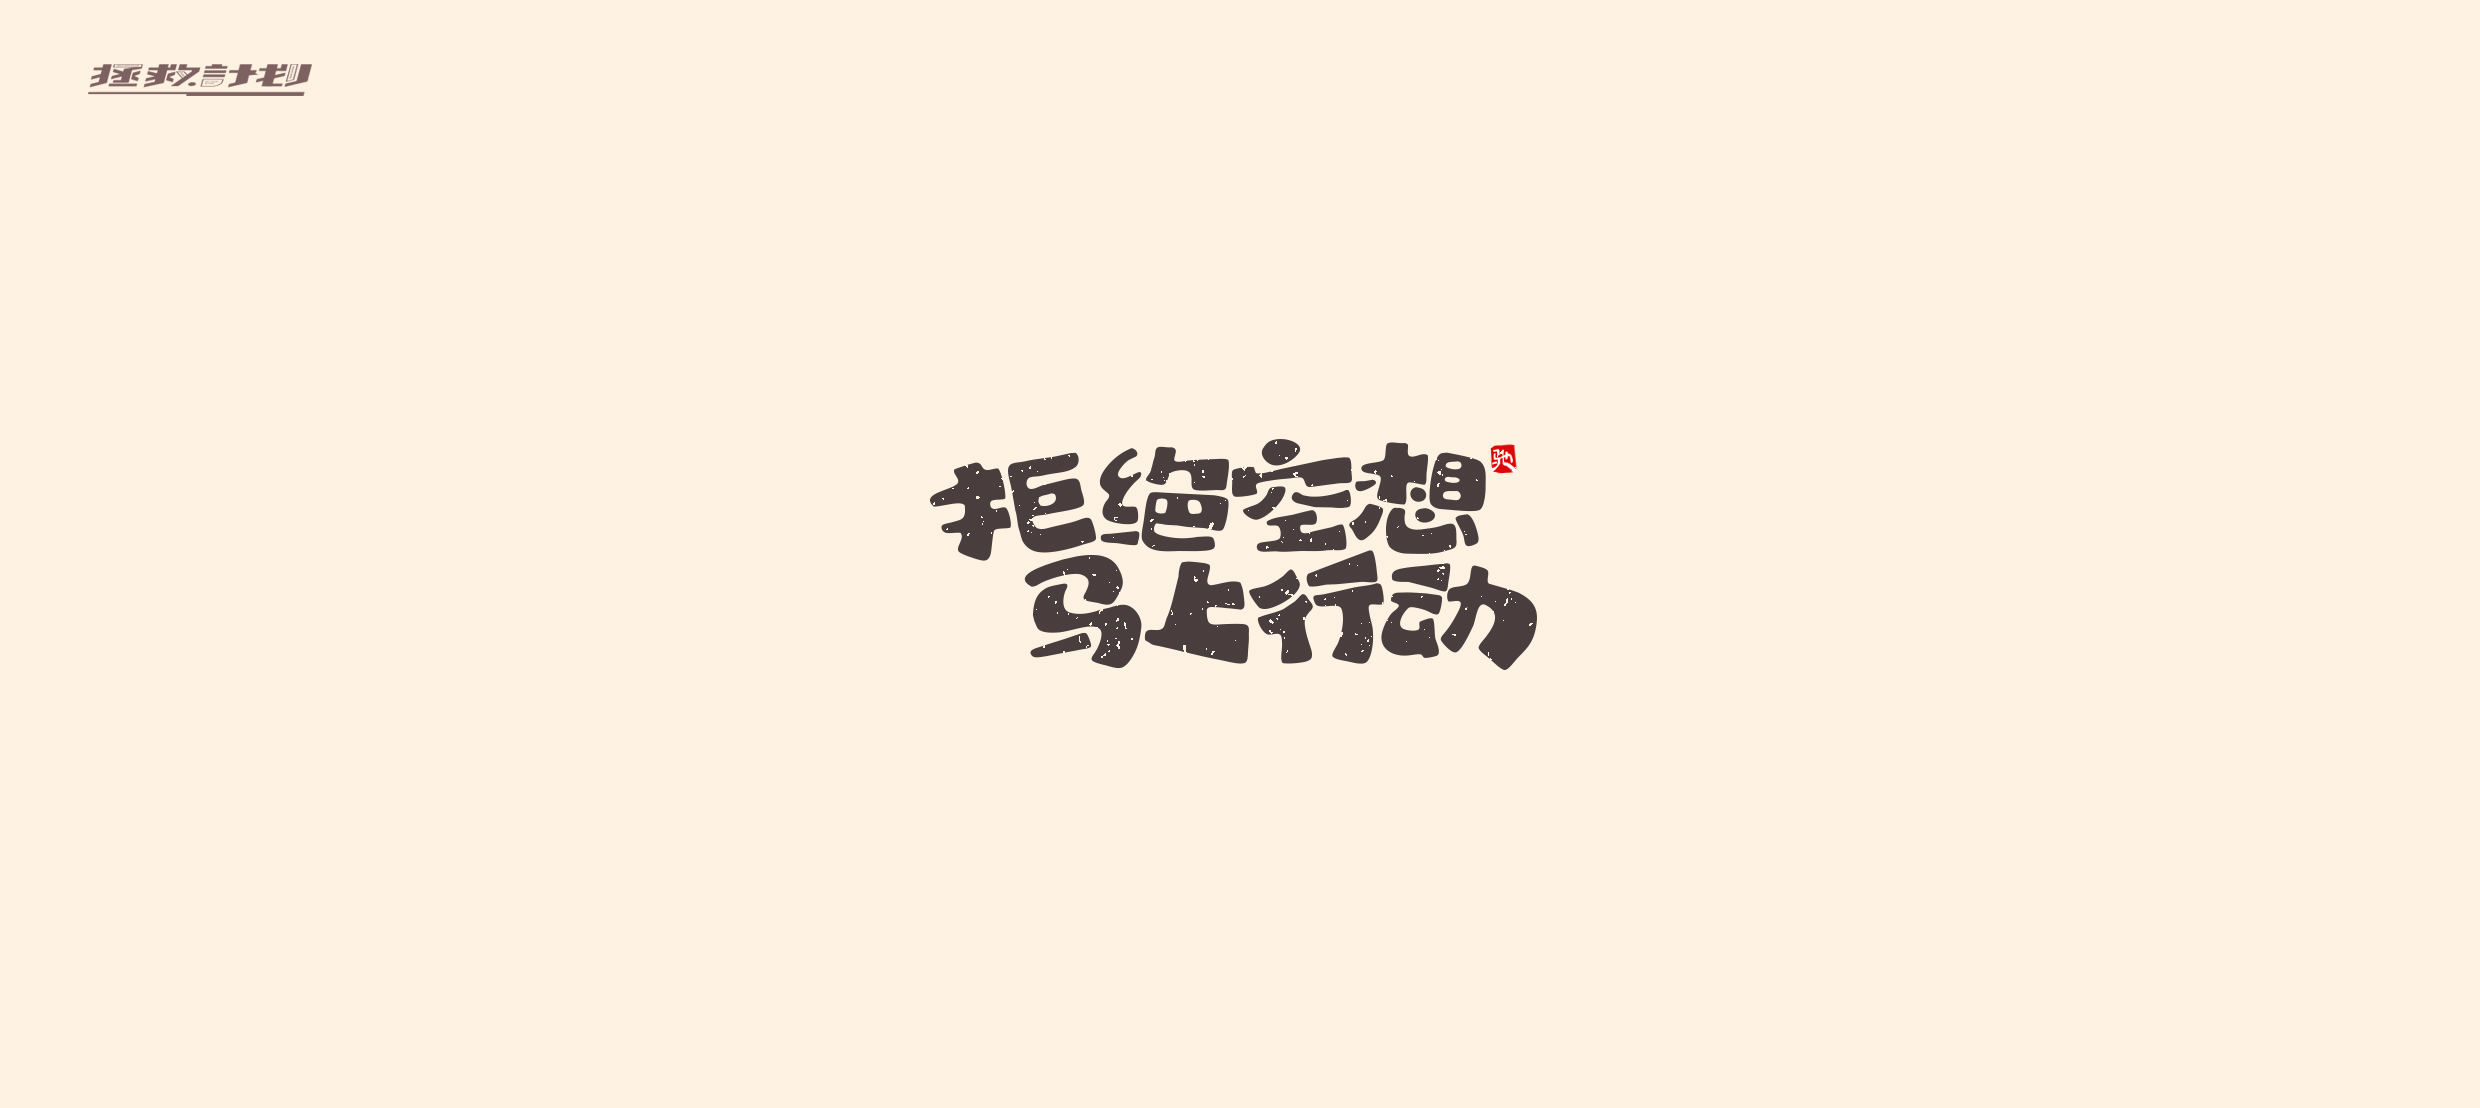 26P Collection of the latest Chinese font design schemes in 2021 #.13